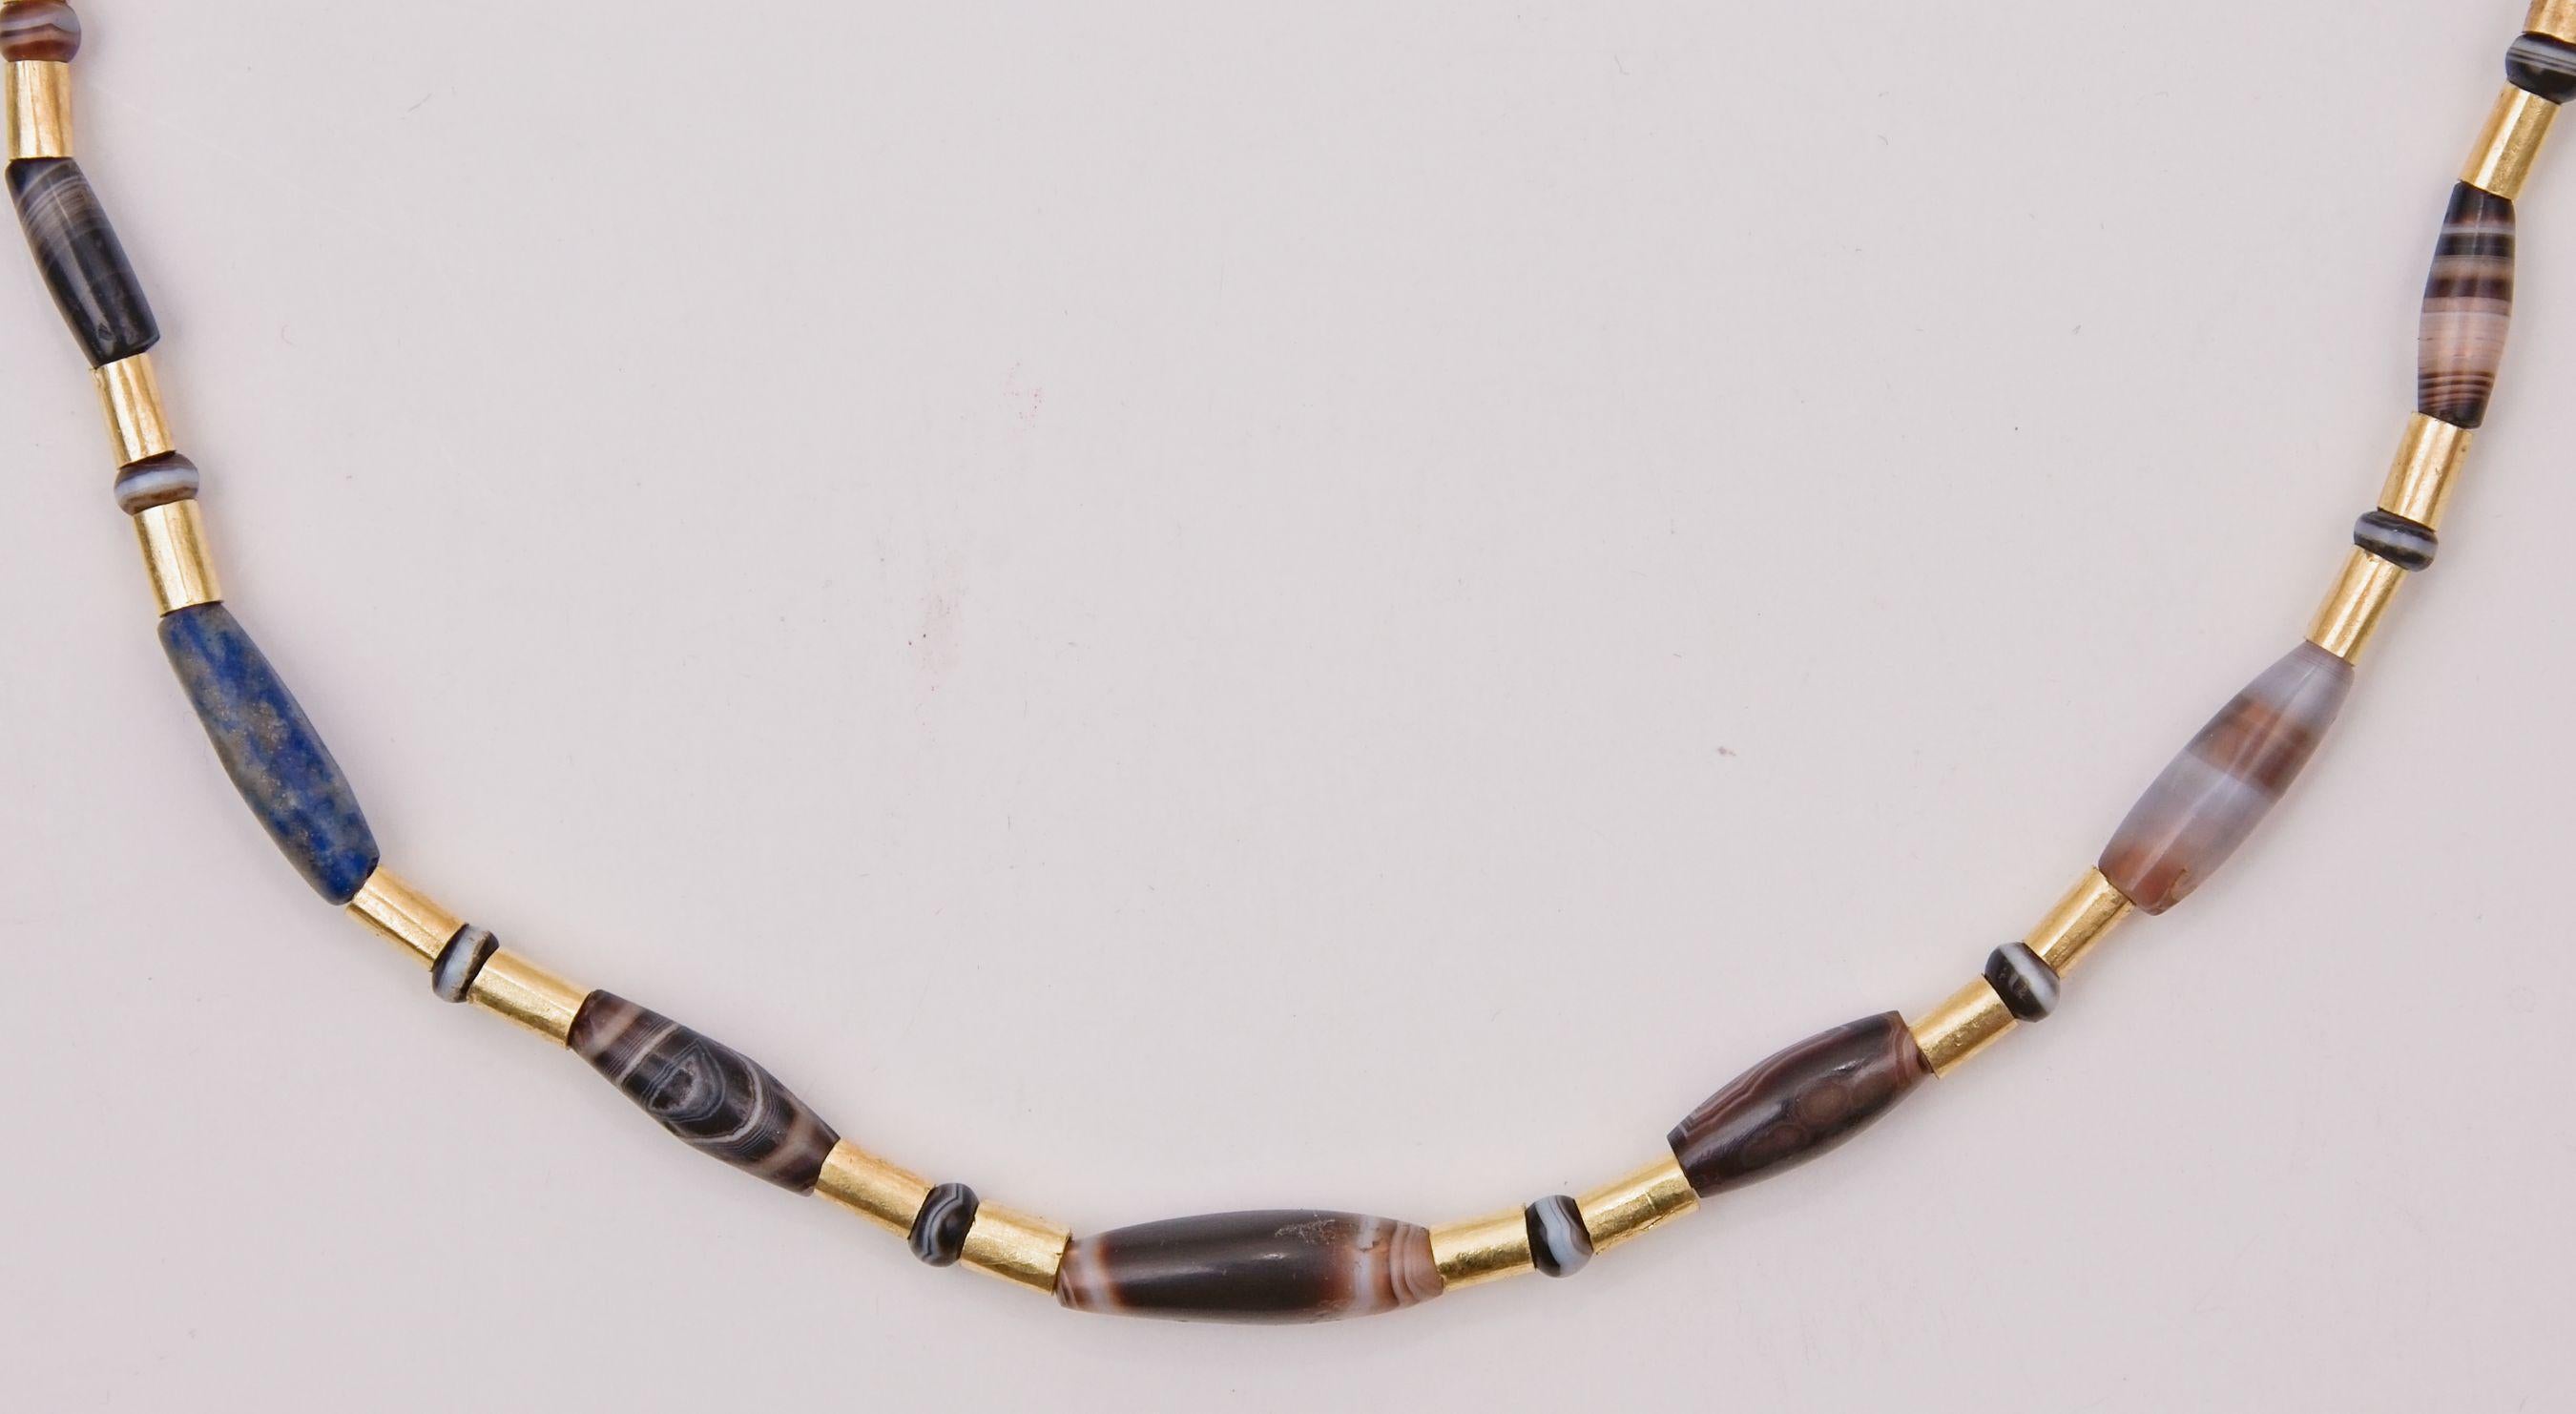 The idea of alternating gold beads with an equal number of round and barrel-shaped beads made of a variety of colored stones comes from our appreciation of the jewelry of Susa in the Achaemenid Period (4th century B.C.). Susa (biblical Shushan) lay